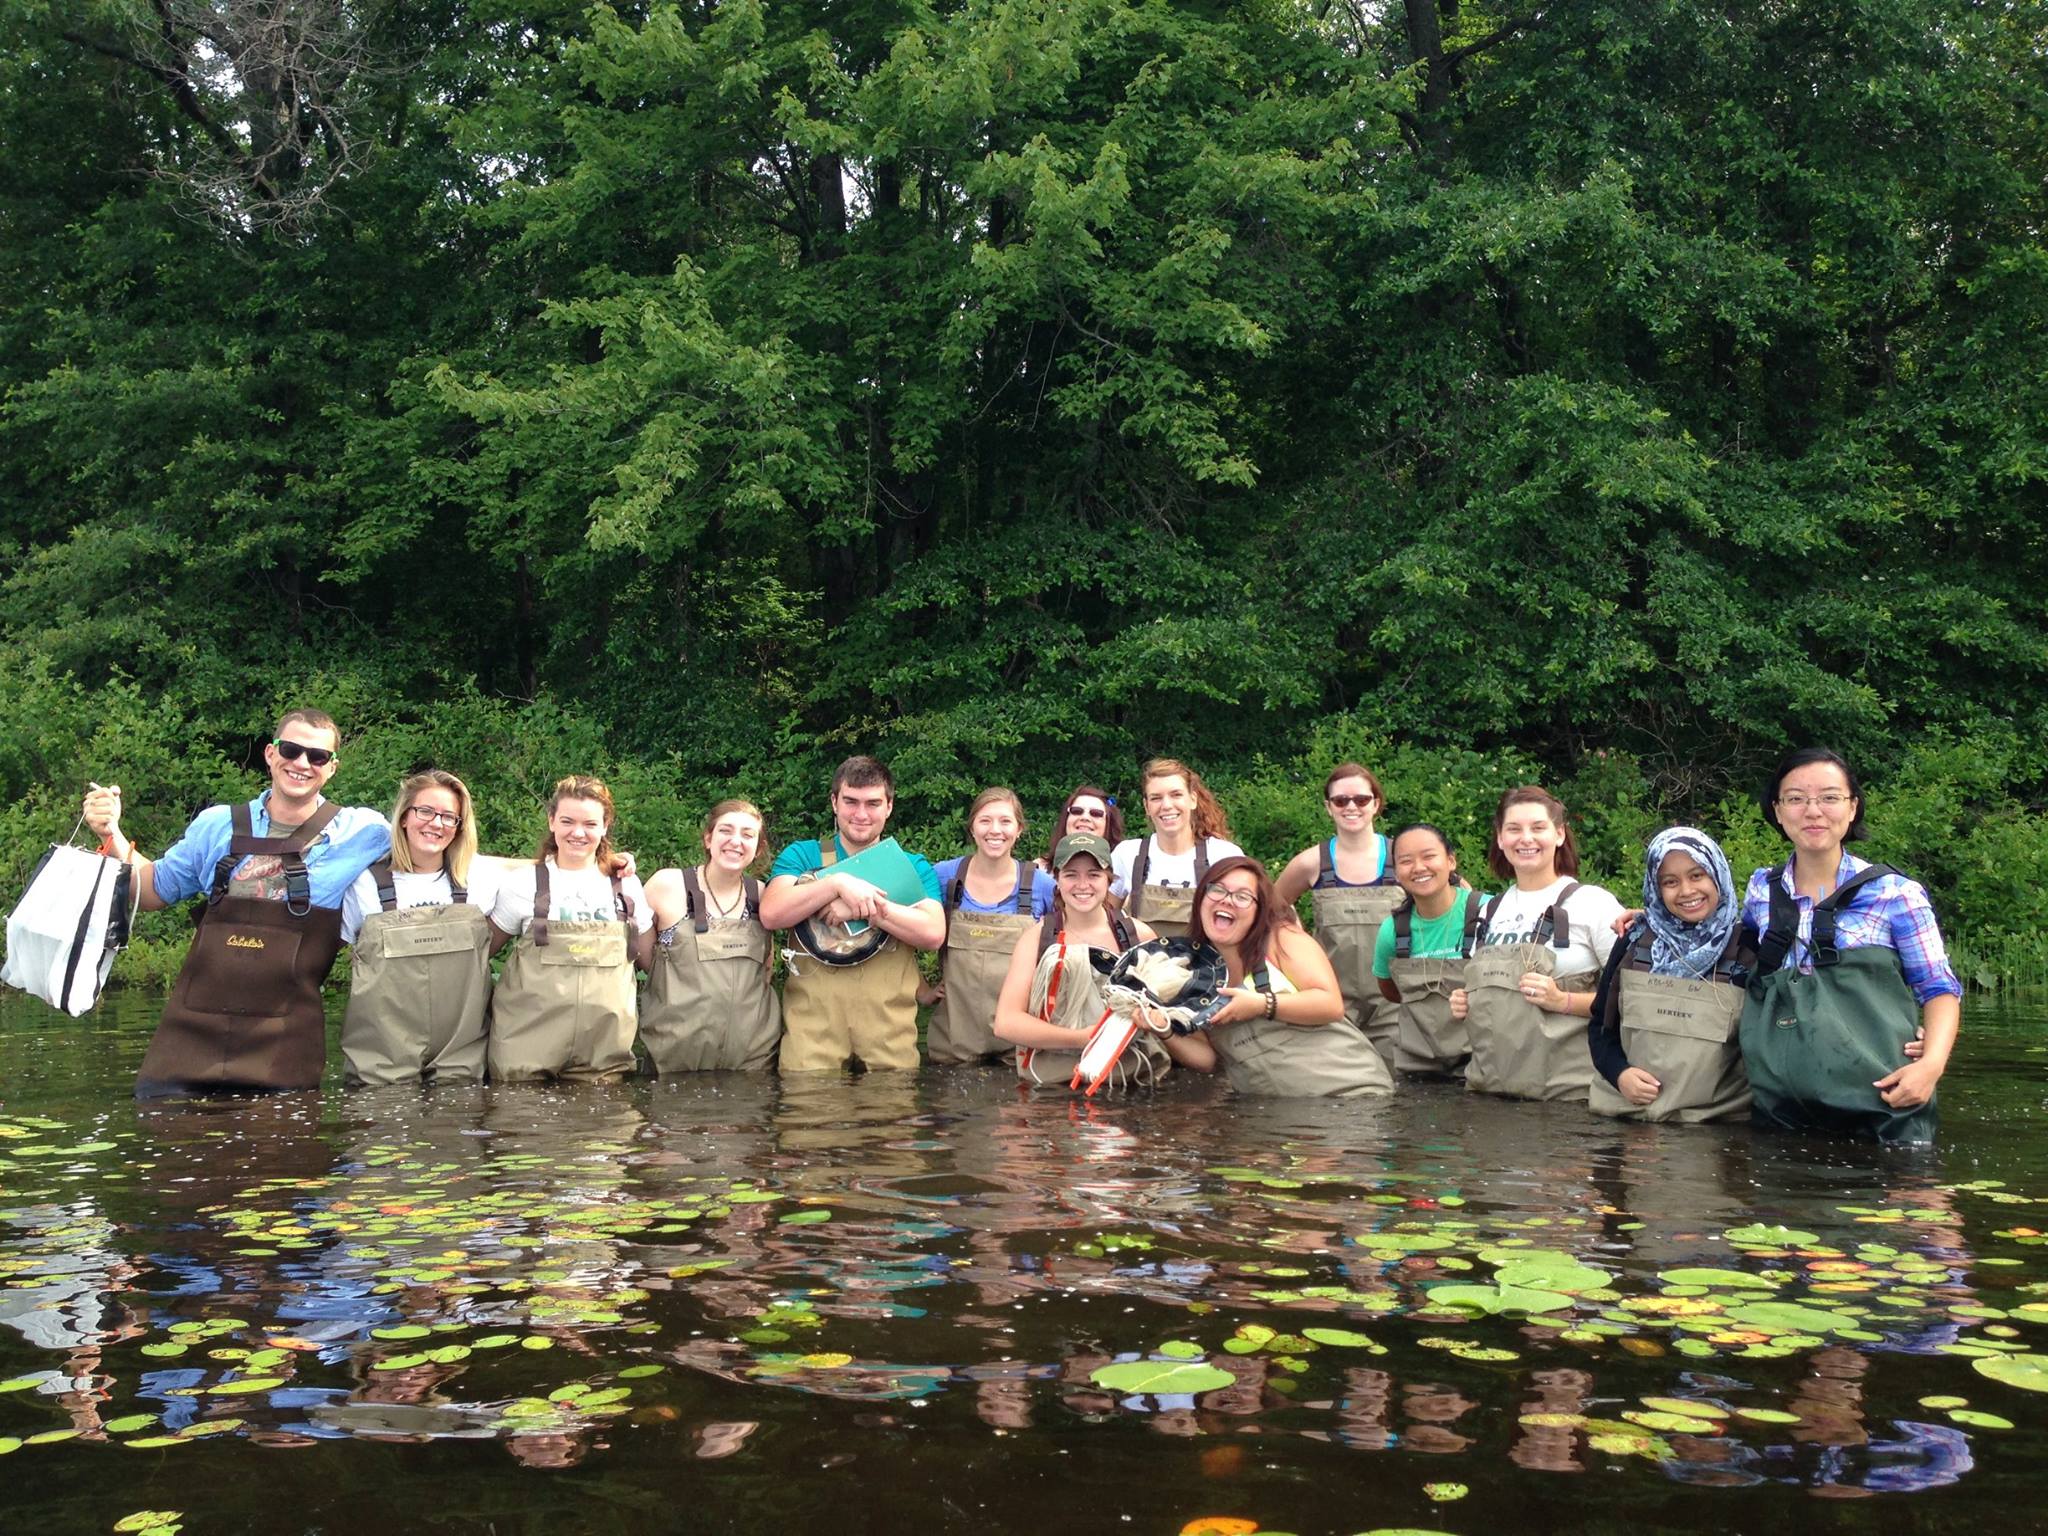 KBS summer course students standing in water with waders on, smiling at the camera.